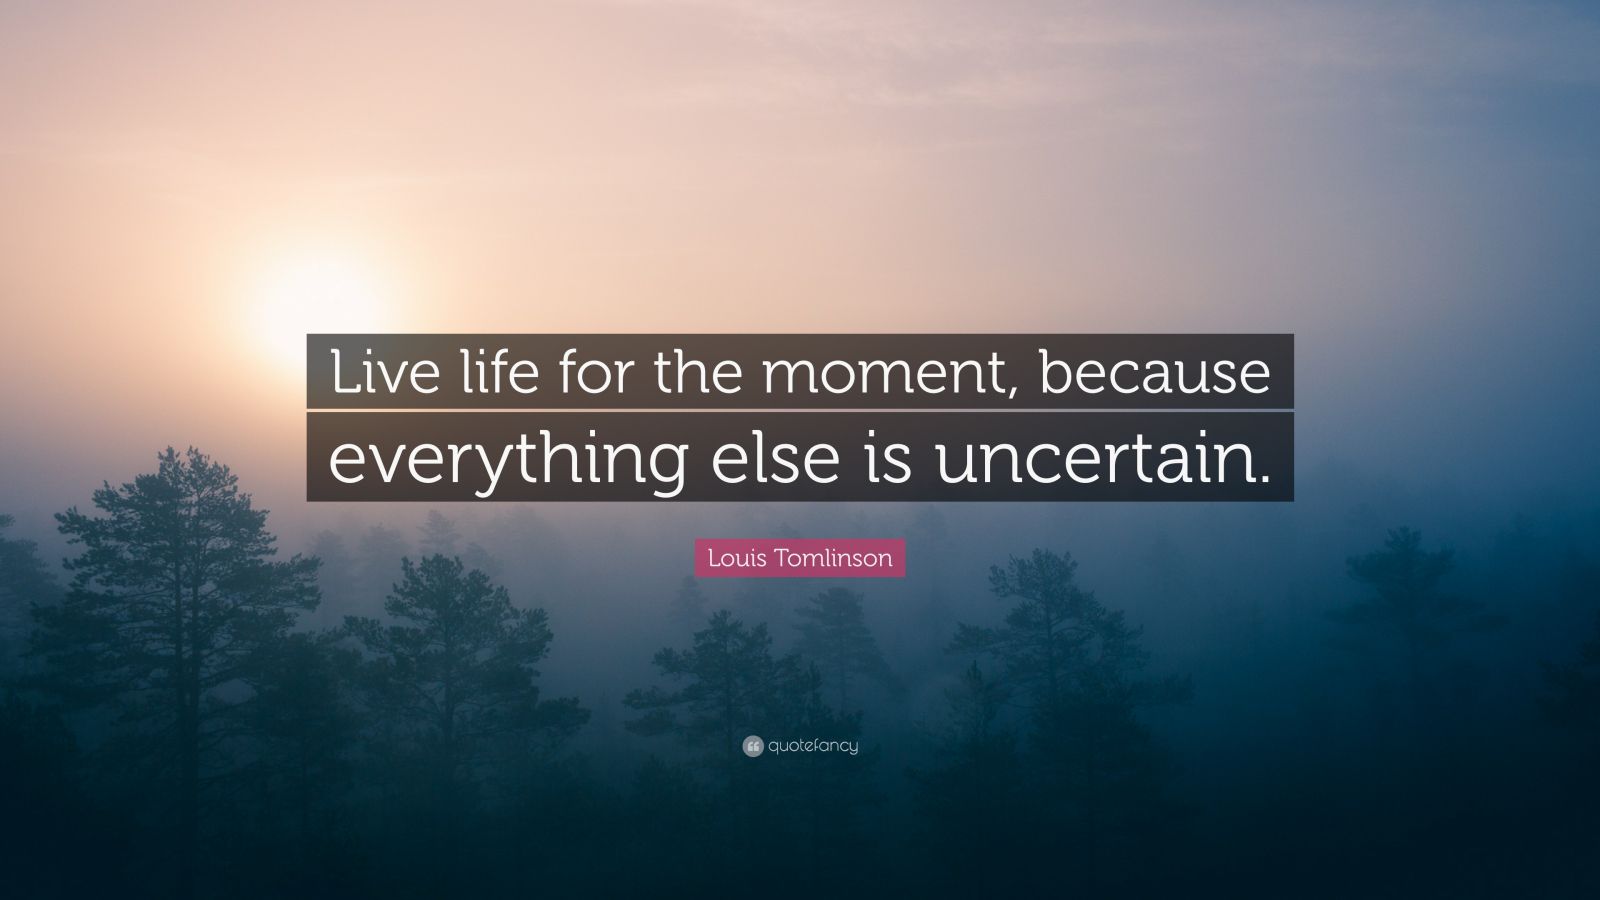 Louis Tomlinson Quote: “Live life for the moment, because everything else is uncertain.” (12 ...